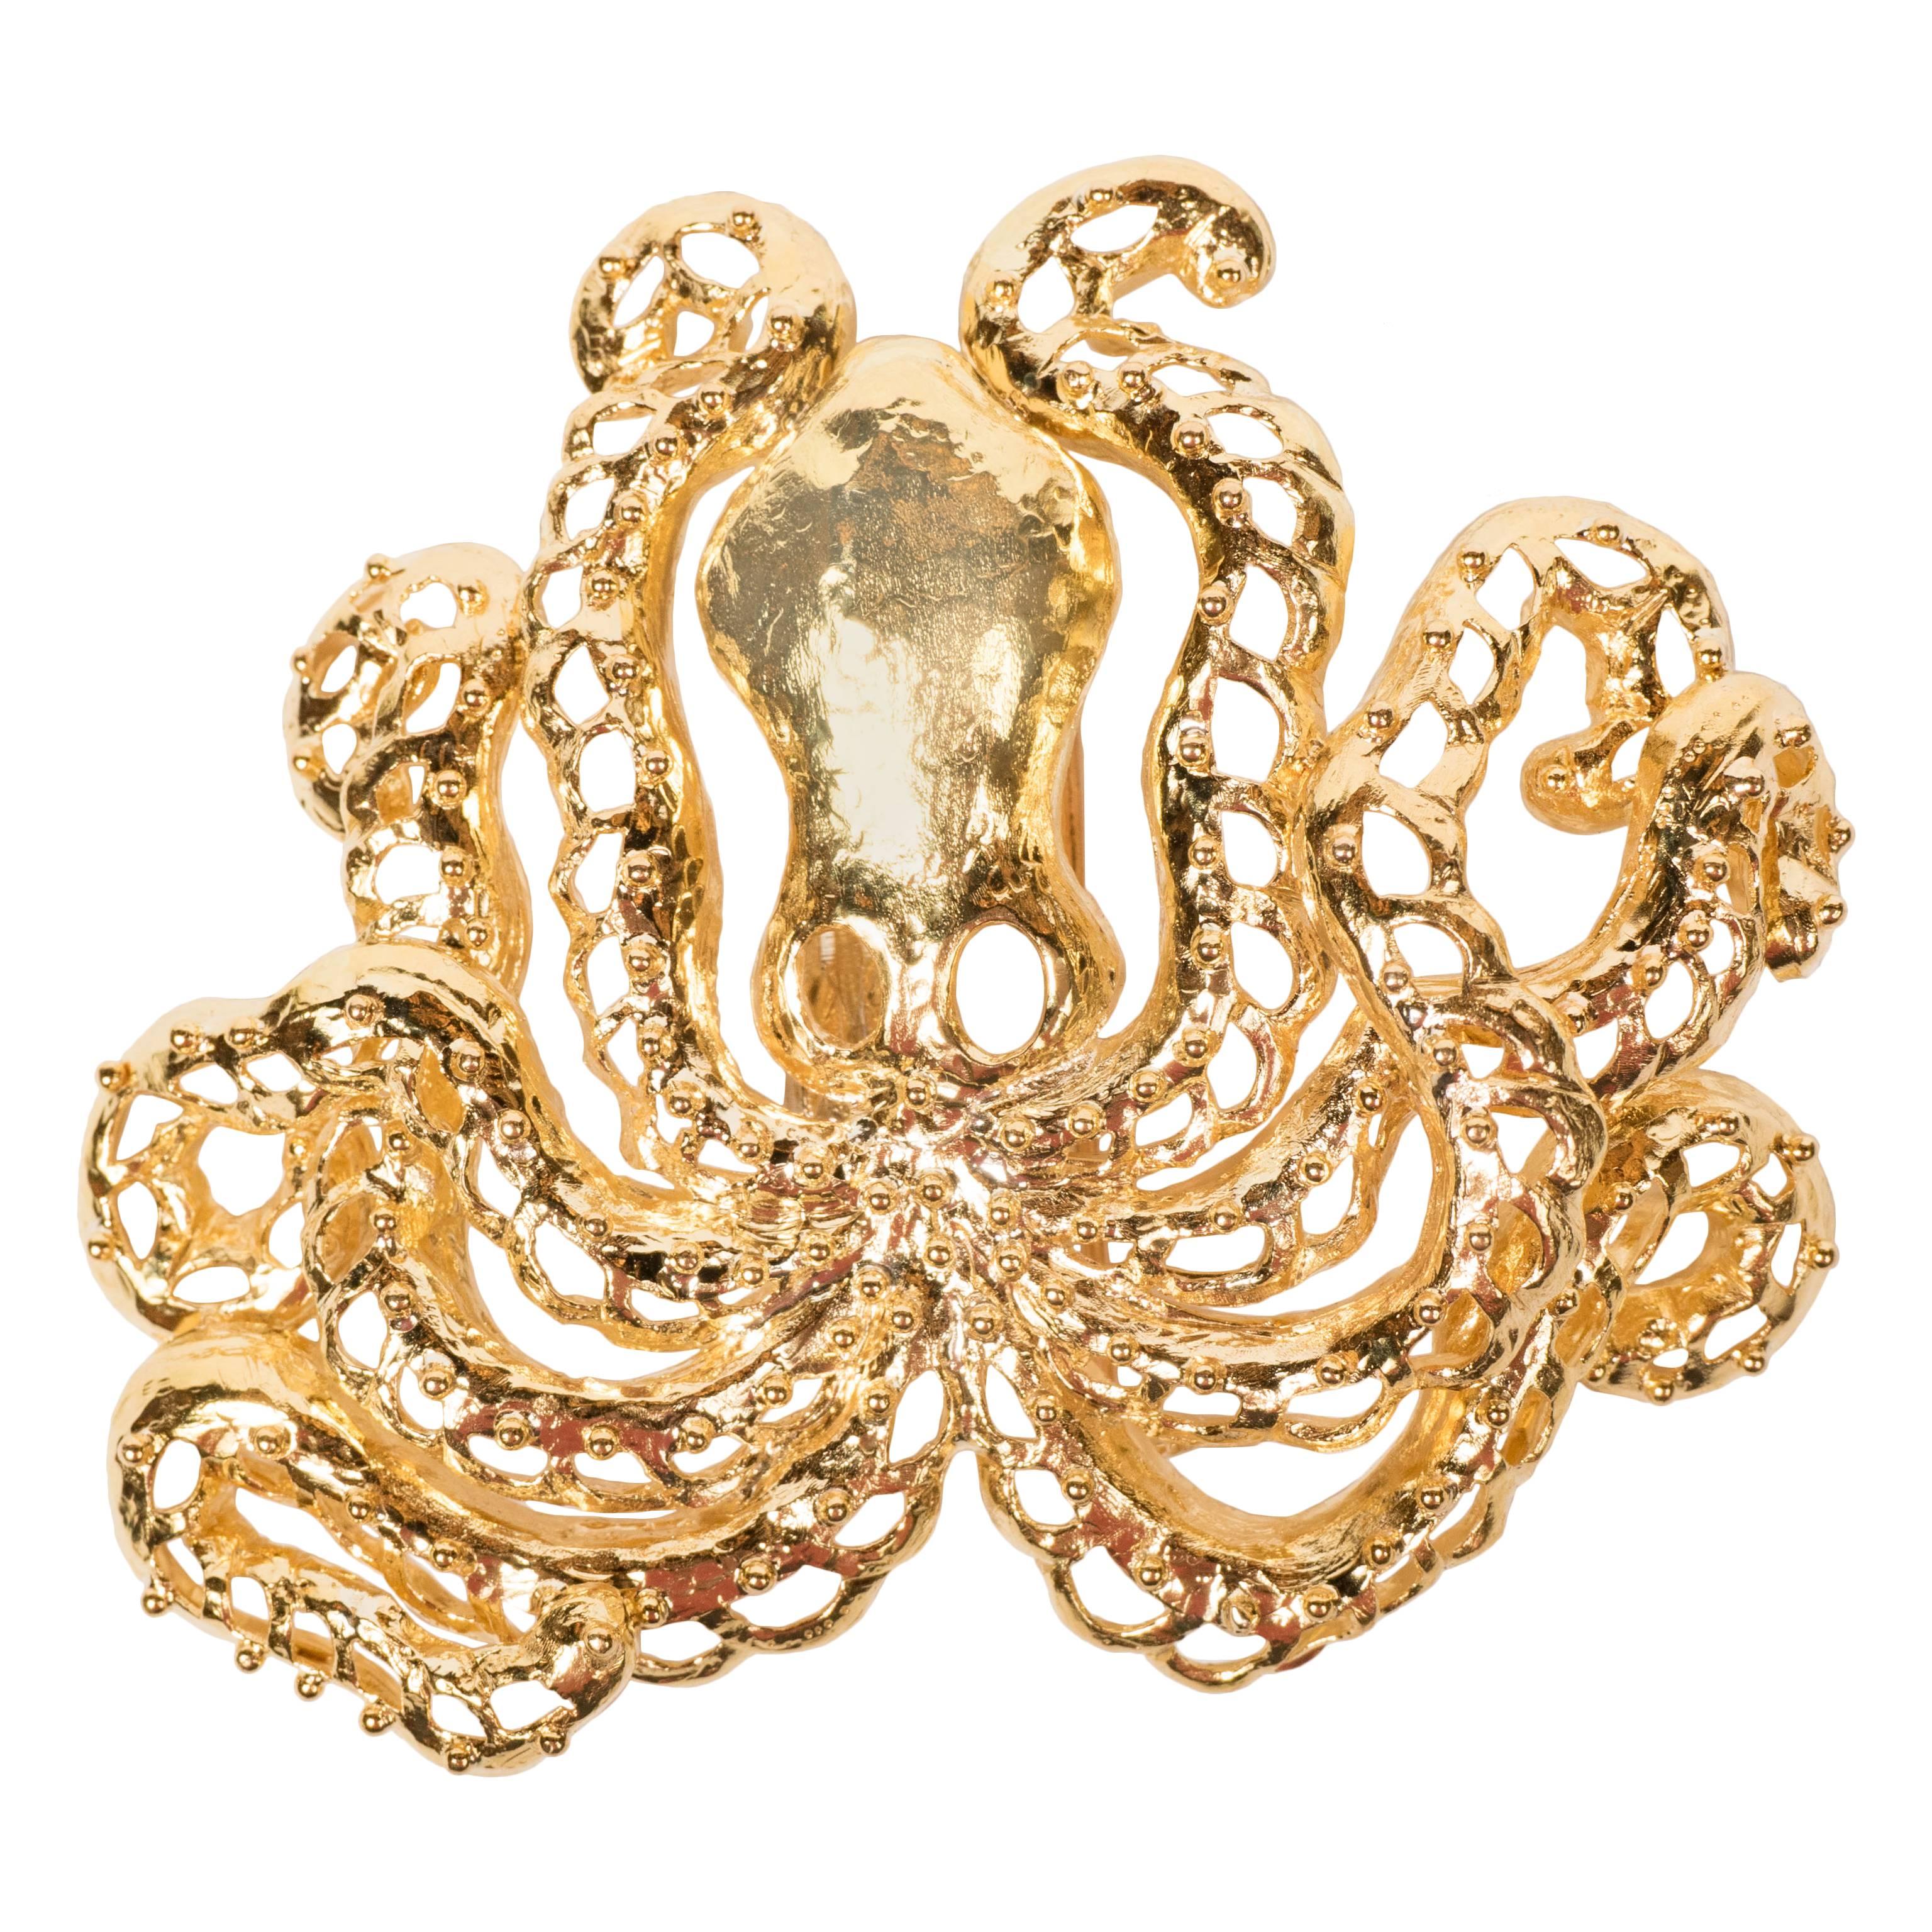 Sophisticated Mid-Century Gold Octopus Brooch